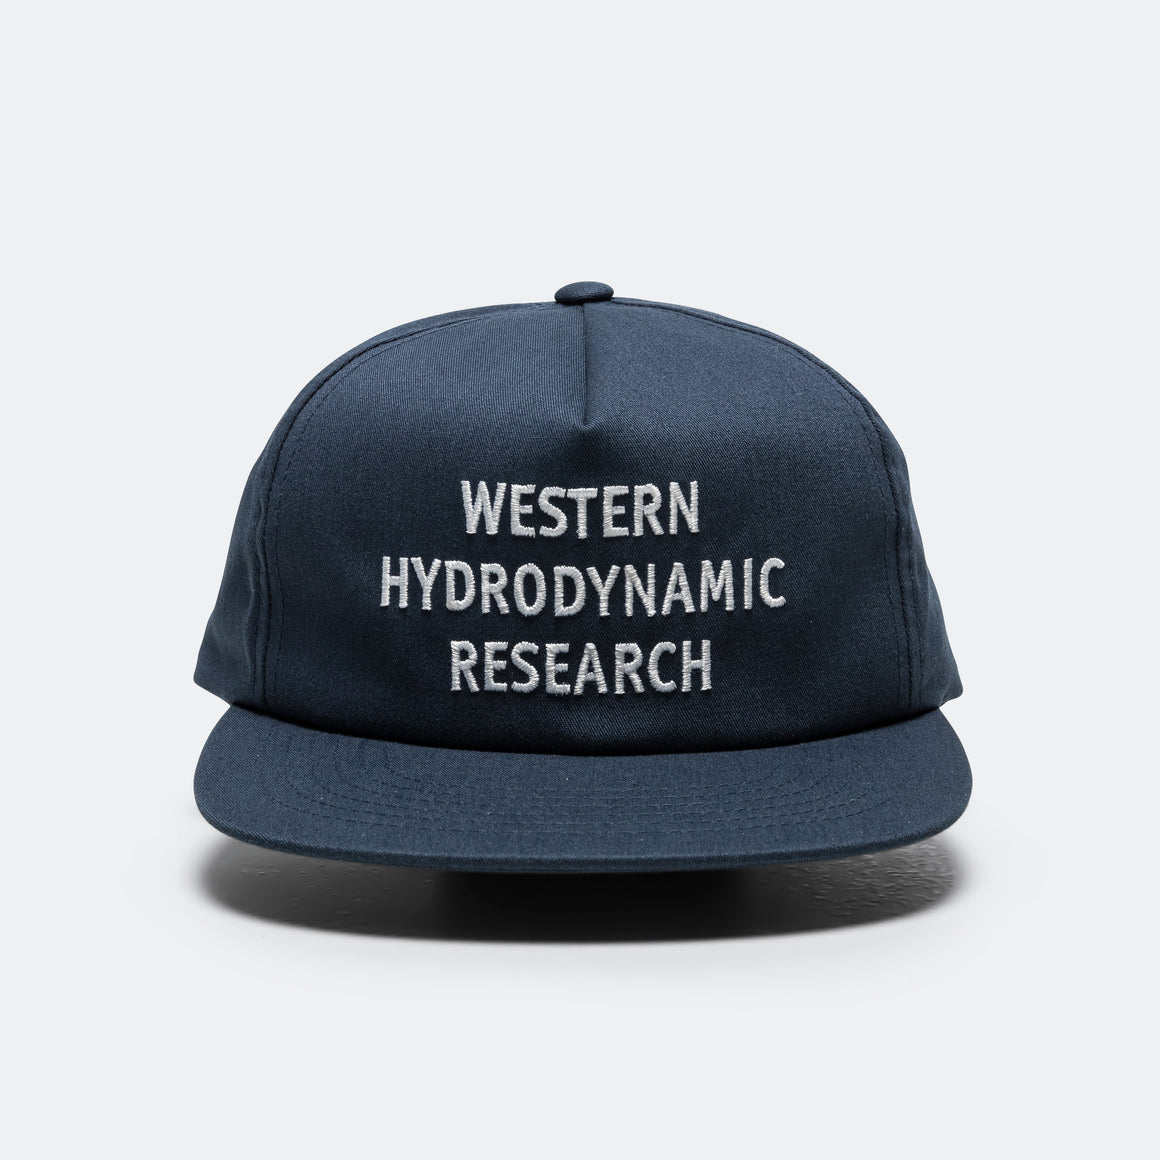 Promotional Hat - Navy